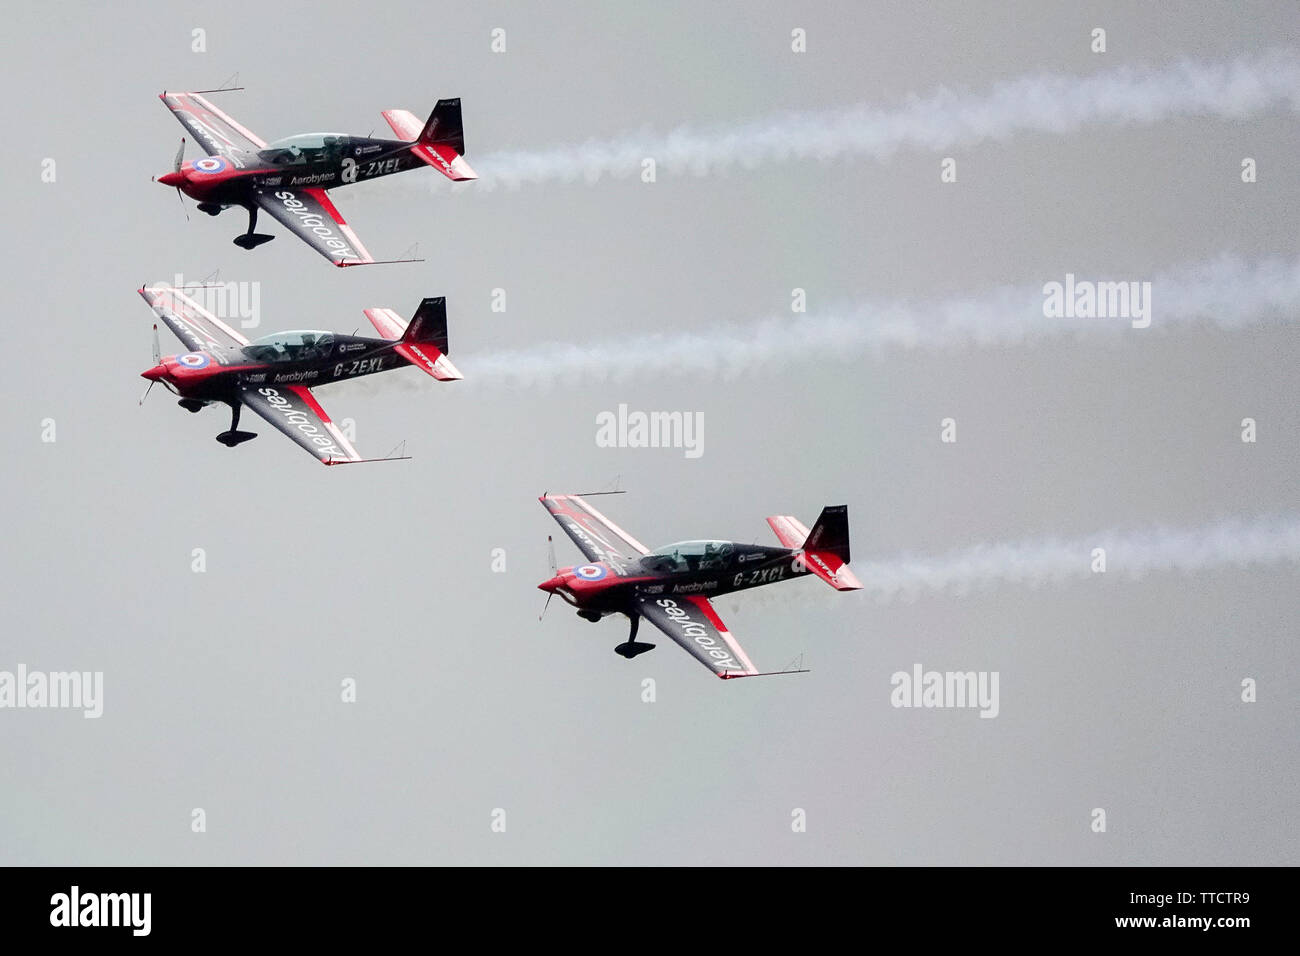 Dunsfold Common Road, Dunsfold. 16th June 2018. The final air show took place at Dunsfold Aerodrome today. Aircraft seen from Dunsfold village as they took part in the aerobatics display. Credit: james jagger/Alamy Live News Stock Photo